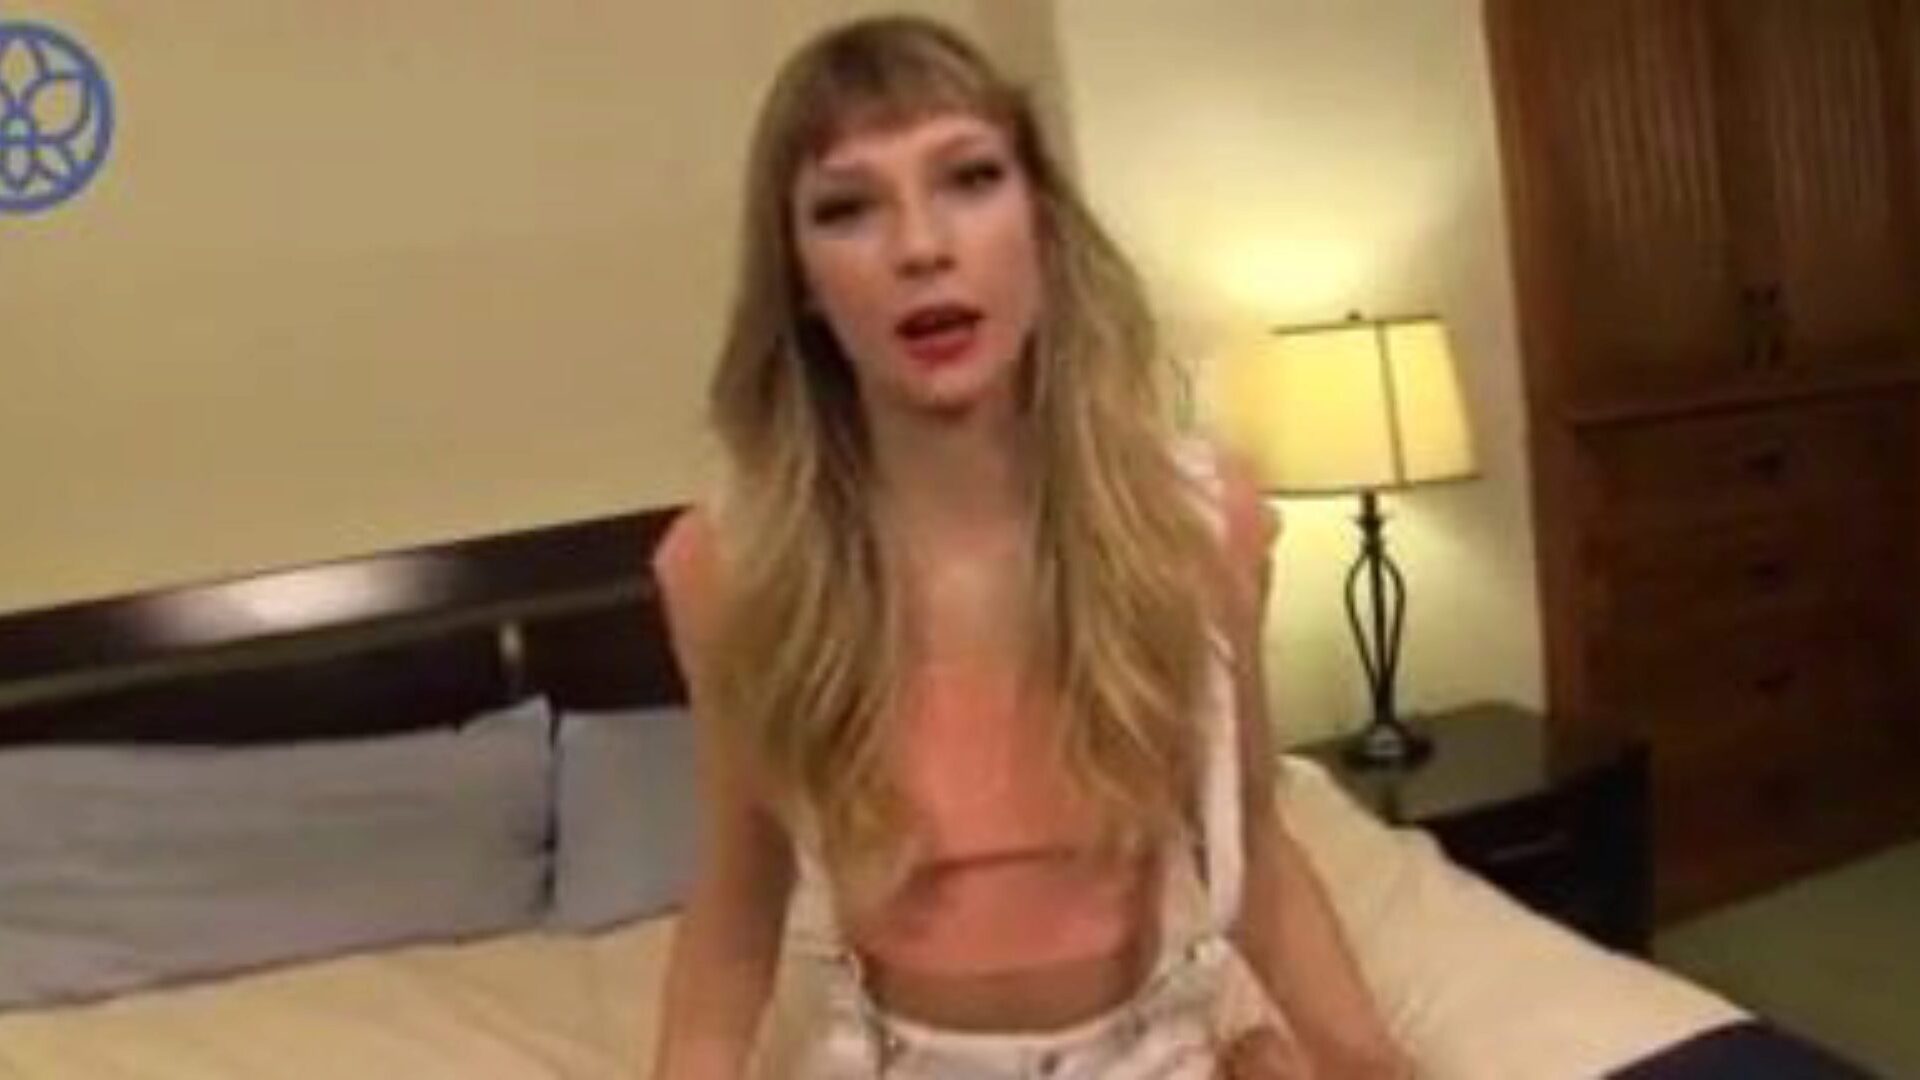 Taylor Swift Fucked on Camera, Free Handsjob Porn Video d6 Watch Taylor Swift Fucked on Camera episode on xHamster, the superlatively good fuckfest tube web resource with tons of free-for-all Handsjob Singer & Lookalike porn movie scenes